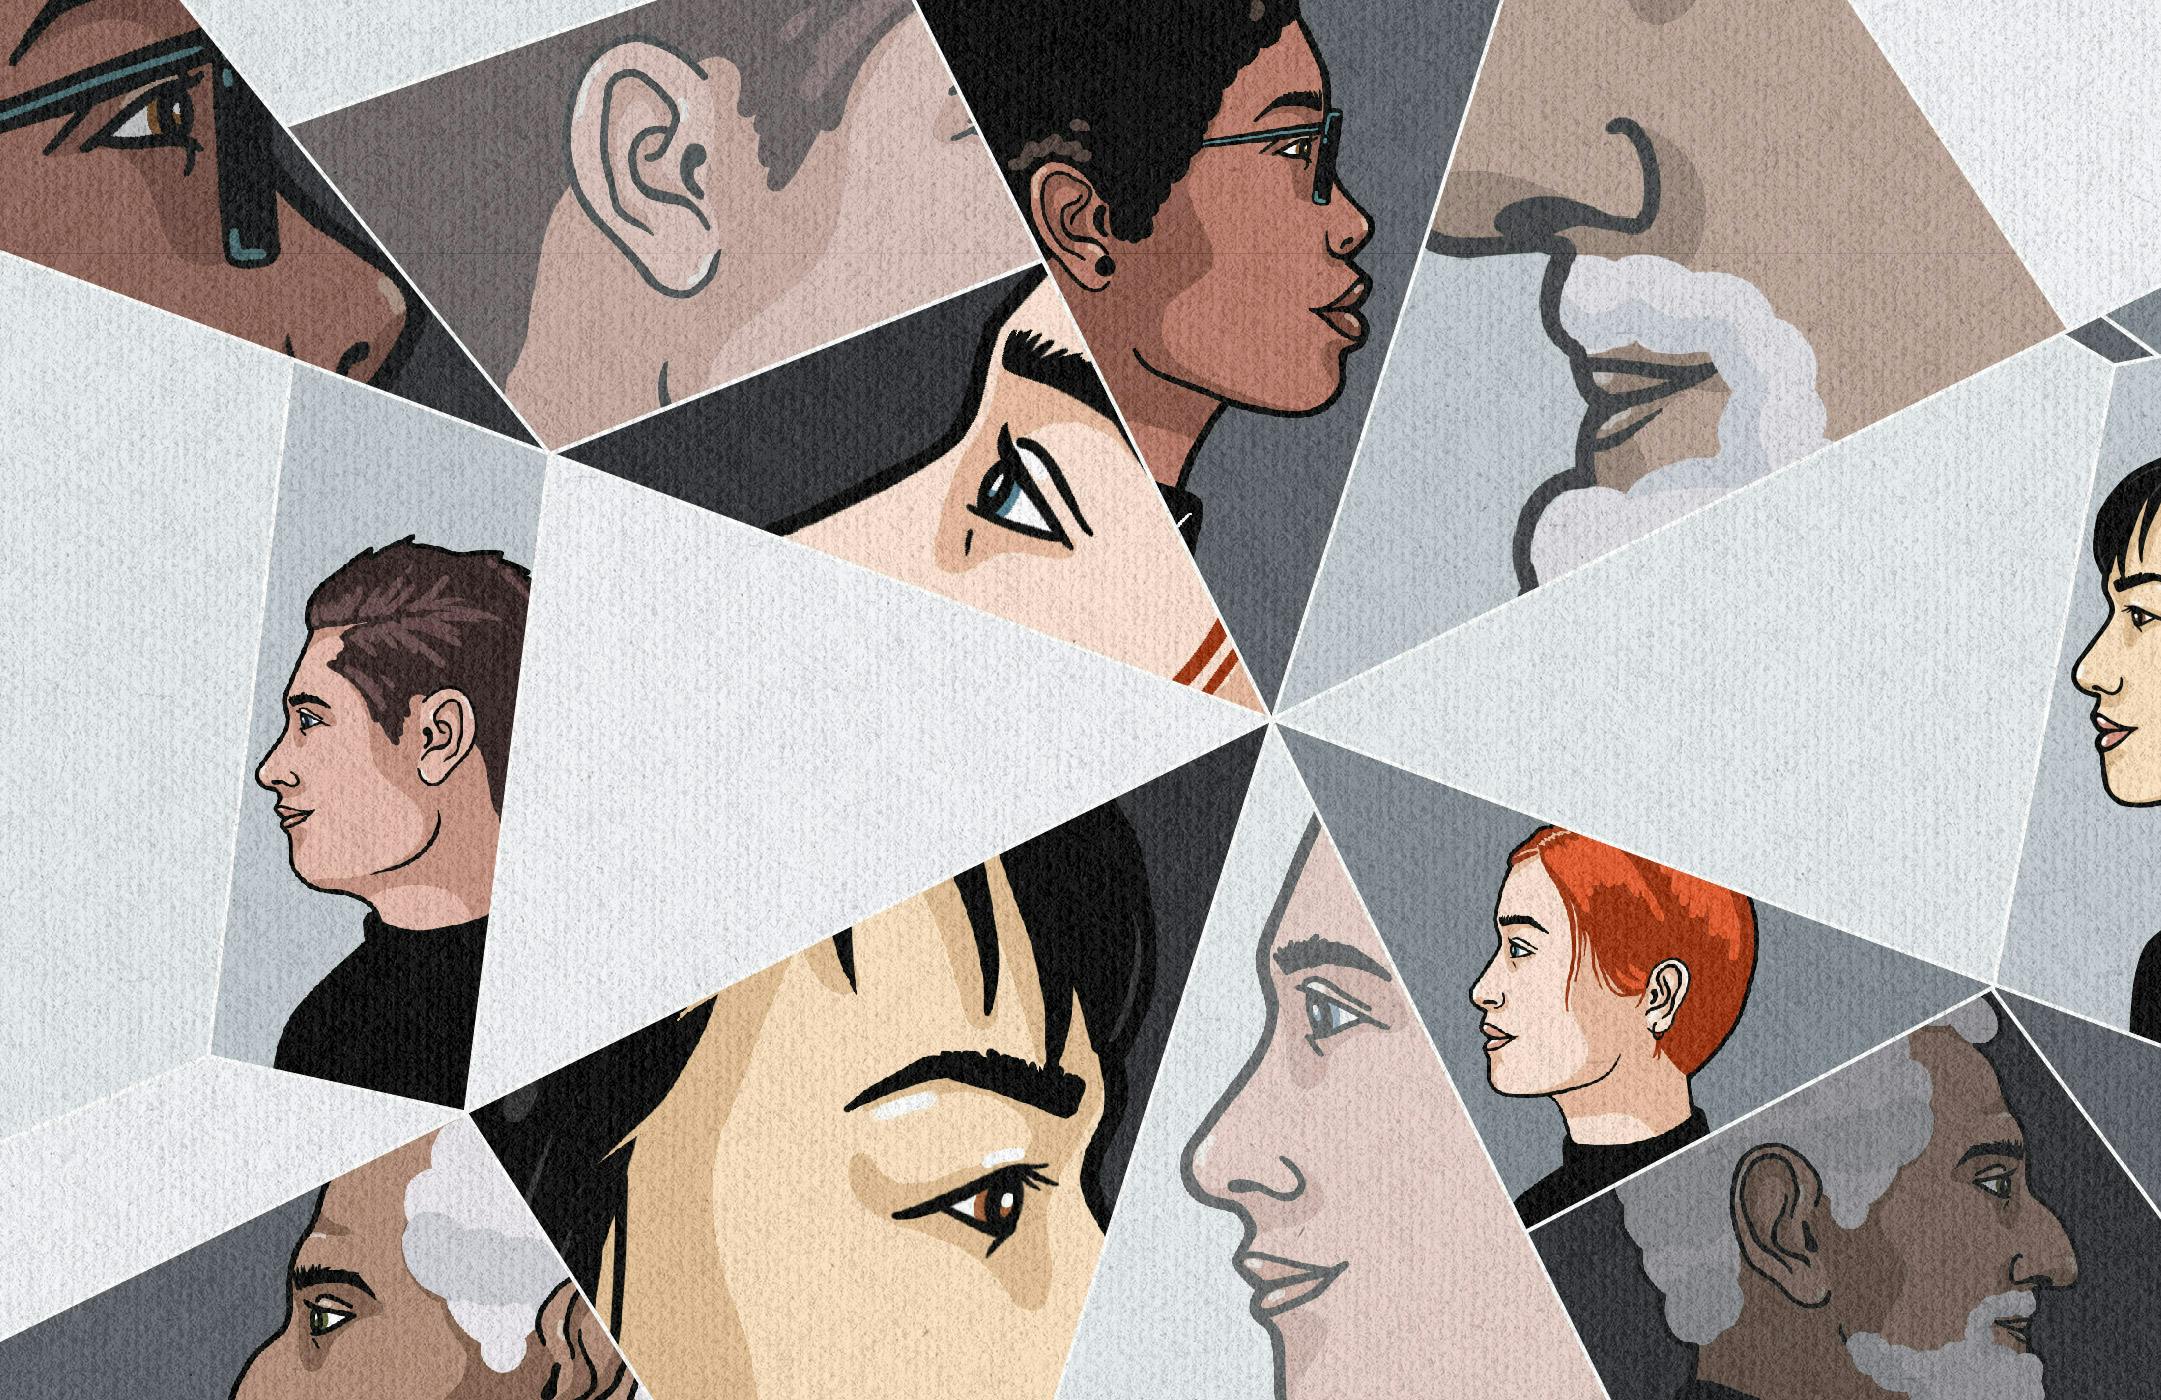 Illustration of multiple peoples' profiles in a fragmented gray-toned mosaic.